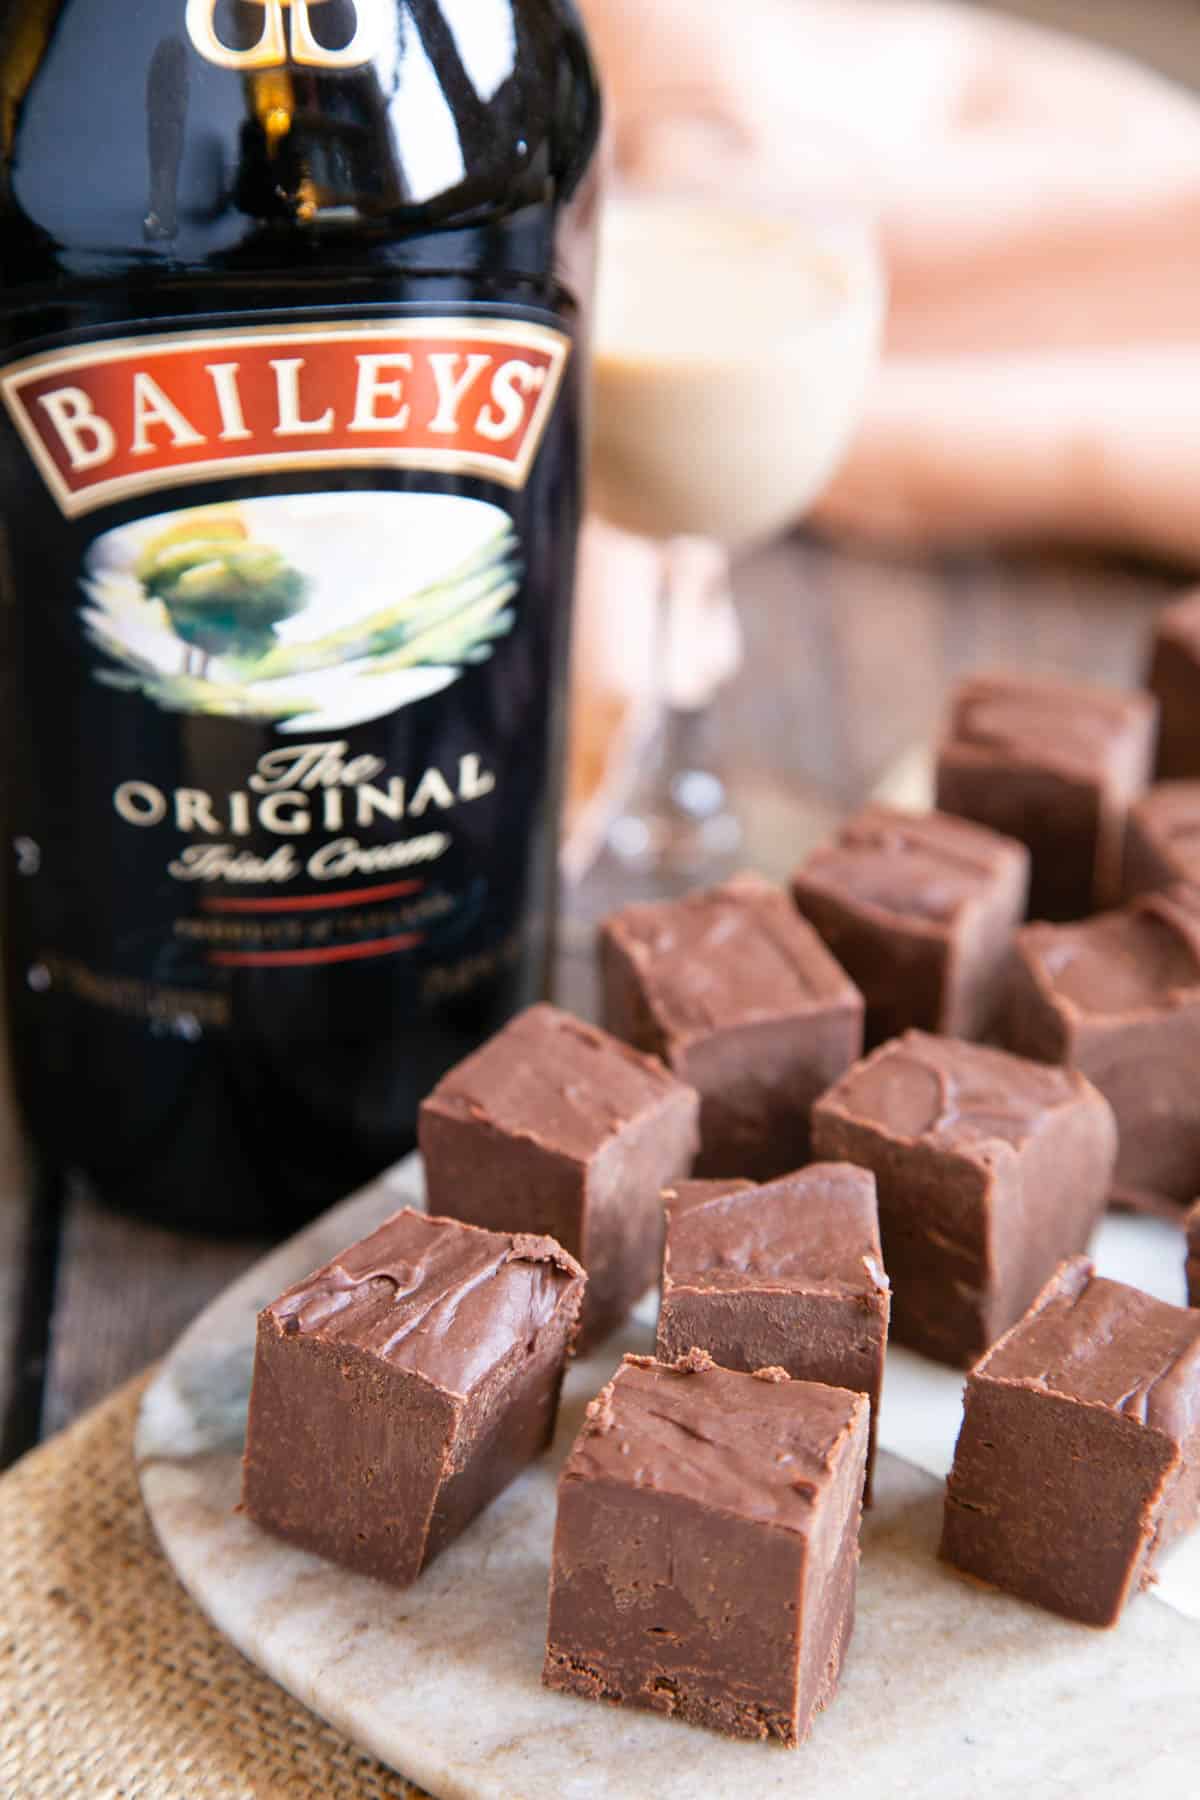 Baileys Irish cream chocolate fudge laid out on a tray with a bottle of Baileys - life's little luxuries